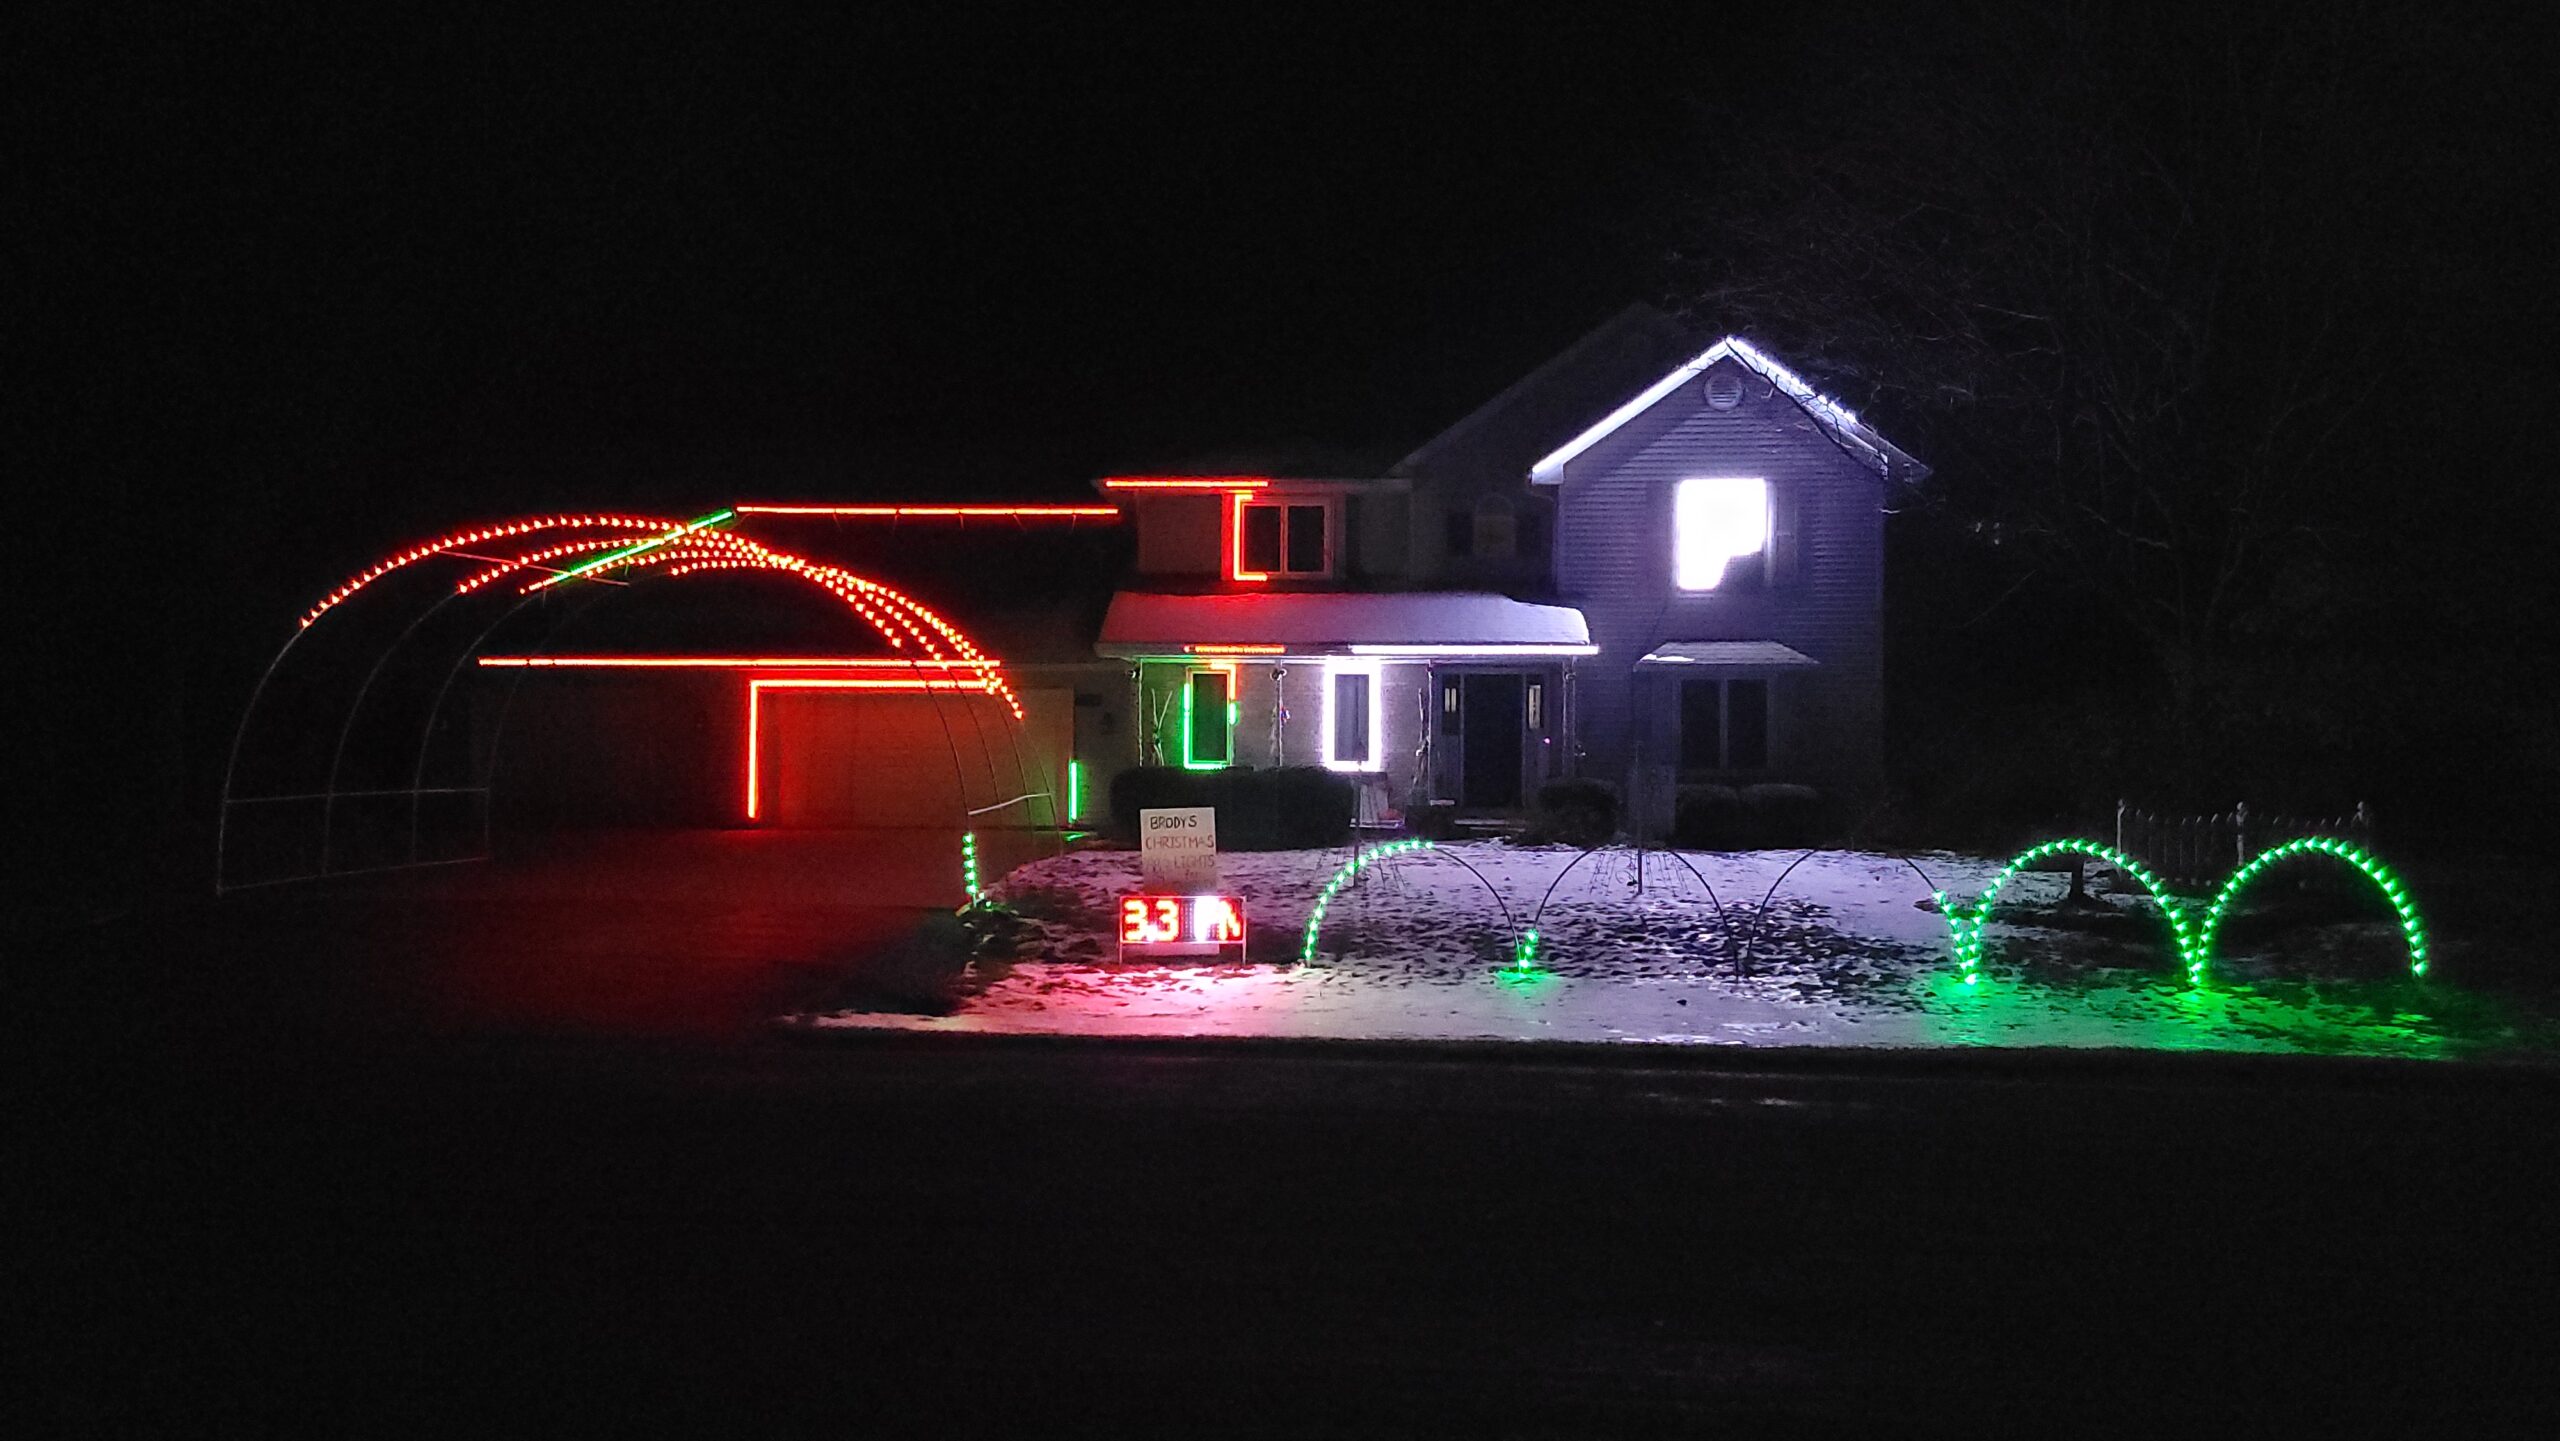 The Enli home is lit up with Christmas lights. 13-year-old Brody Enli spends much of the year preparing for his annual holiday light show that benefits local charities. (Courtesy of the Enli family)